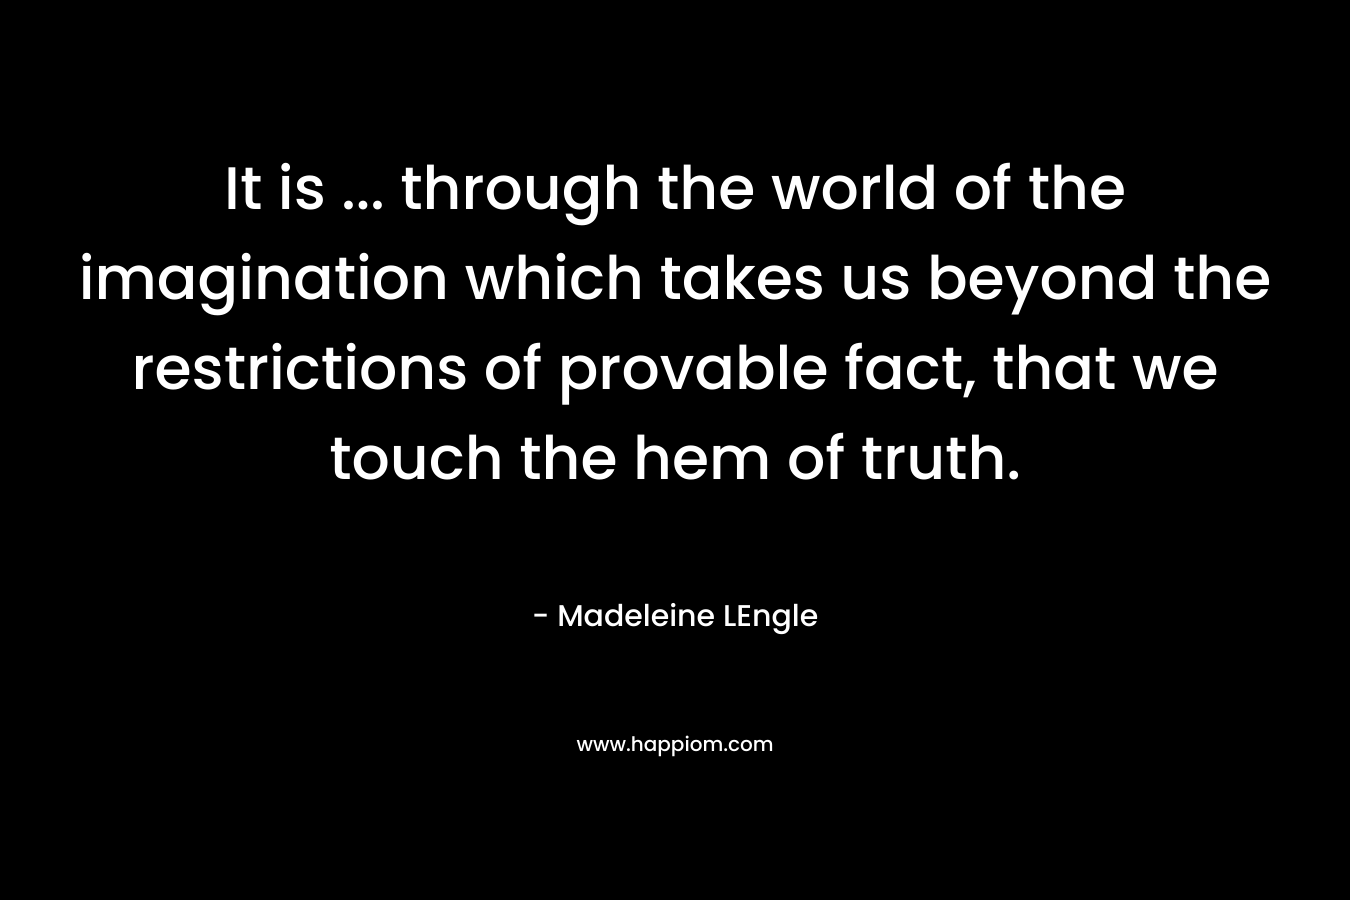 It is … through the world of the imagination which takes us beyond the restrictions of provable fact, that we touch the hem of truth. – Madeleine LEngle